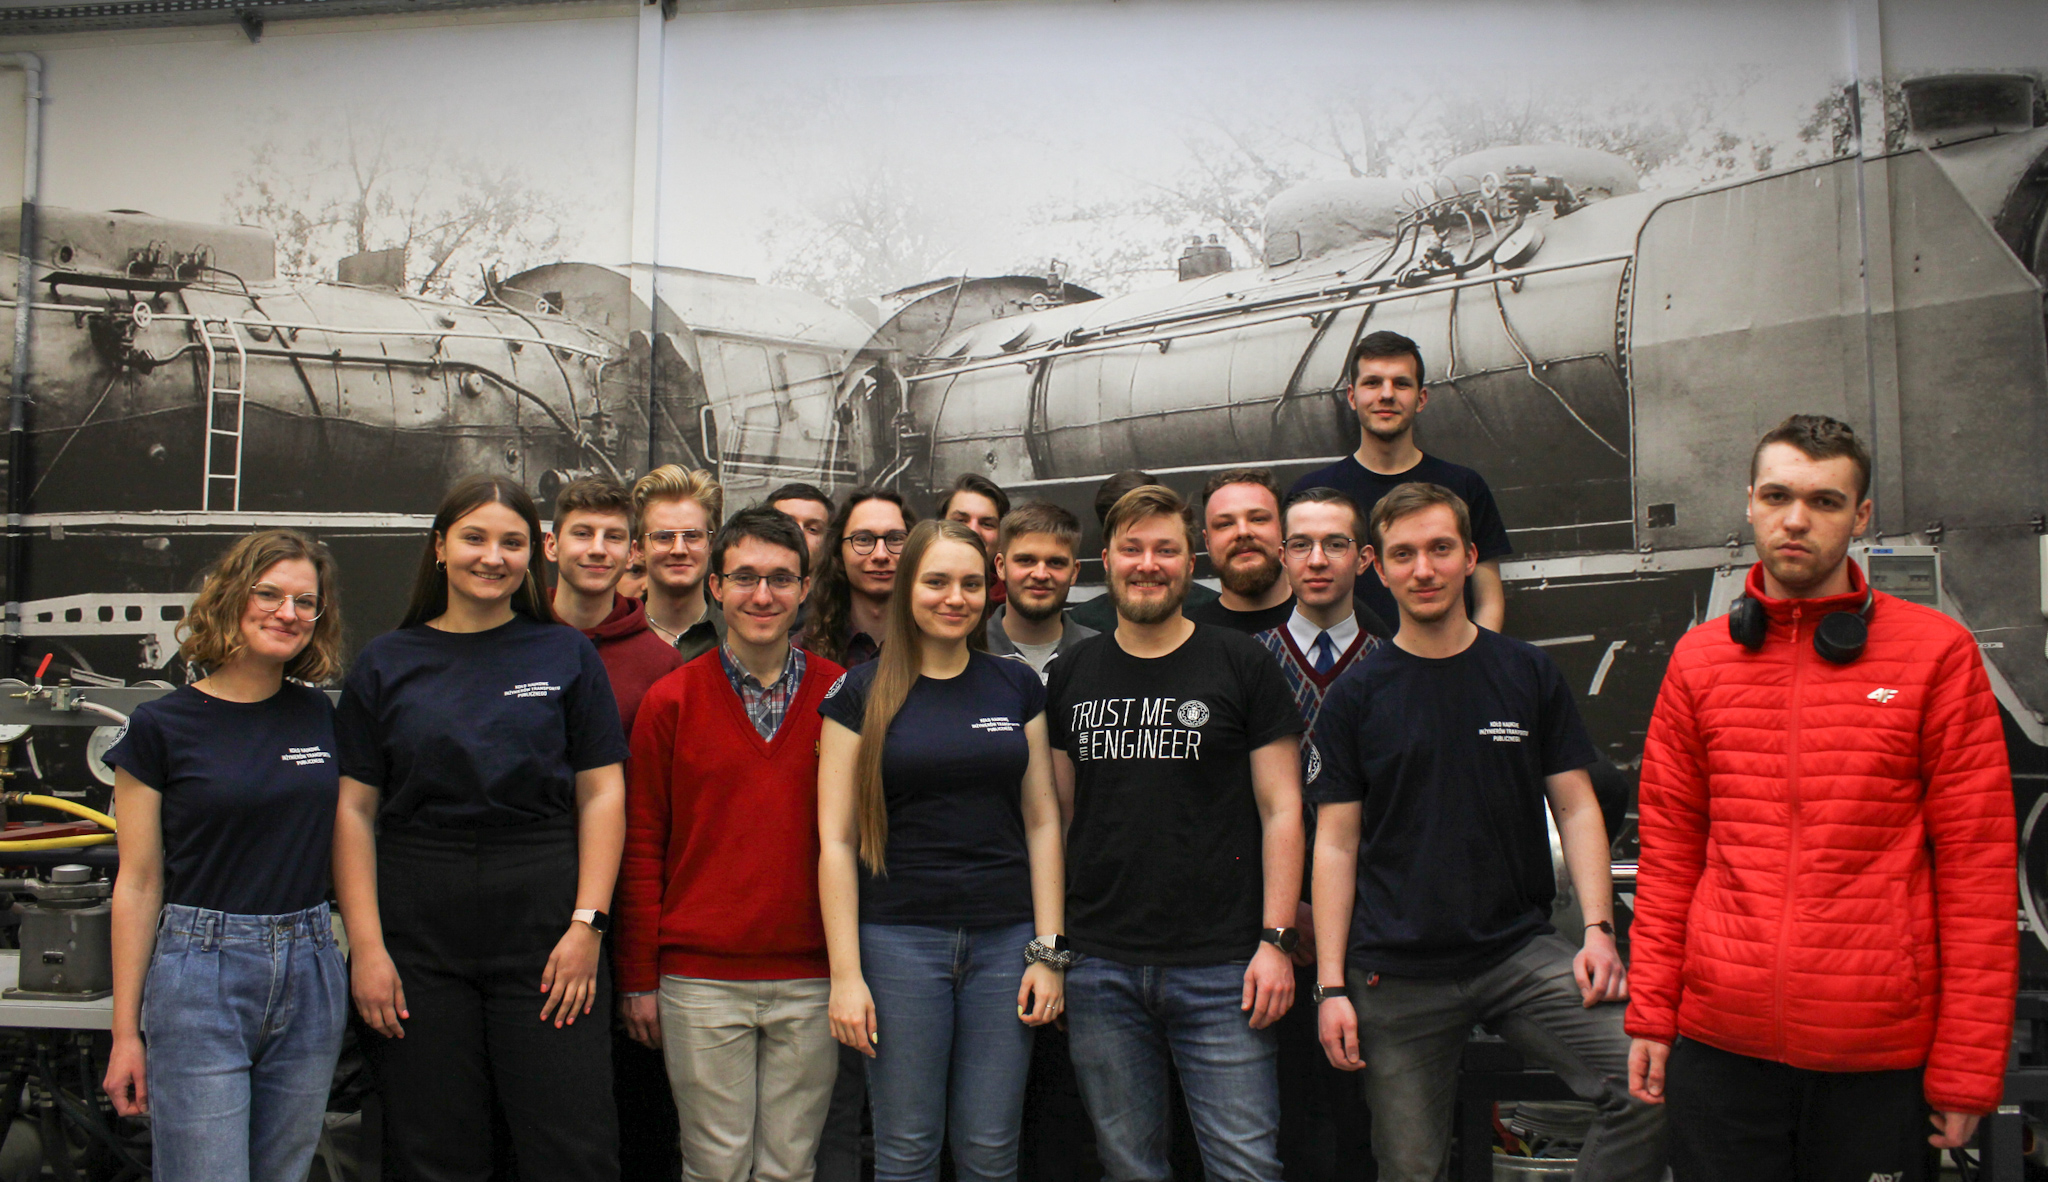 Image depicting the Poznan team with their locomotive at the IMechE Railway challenge